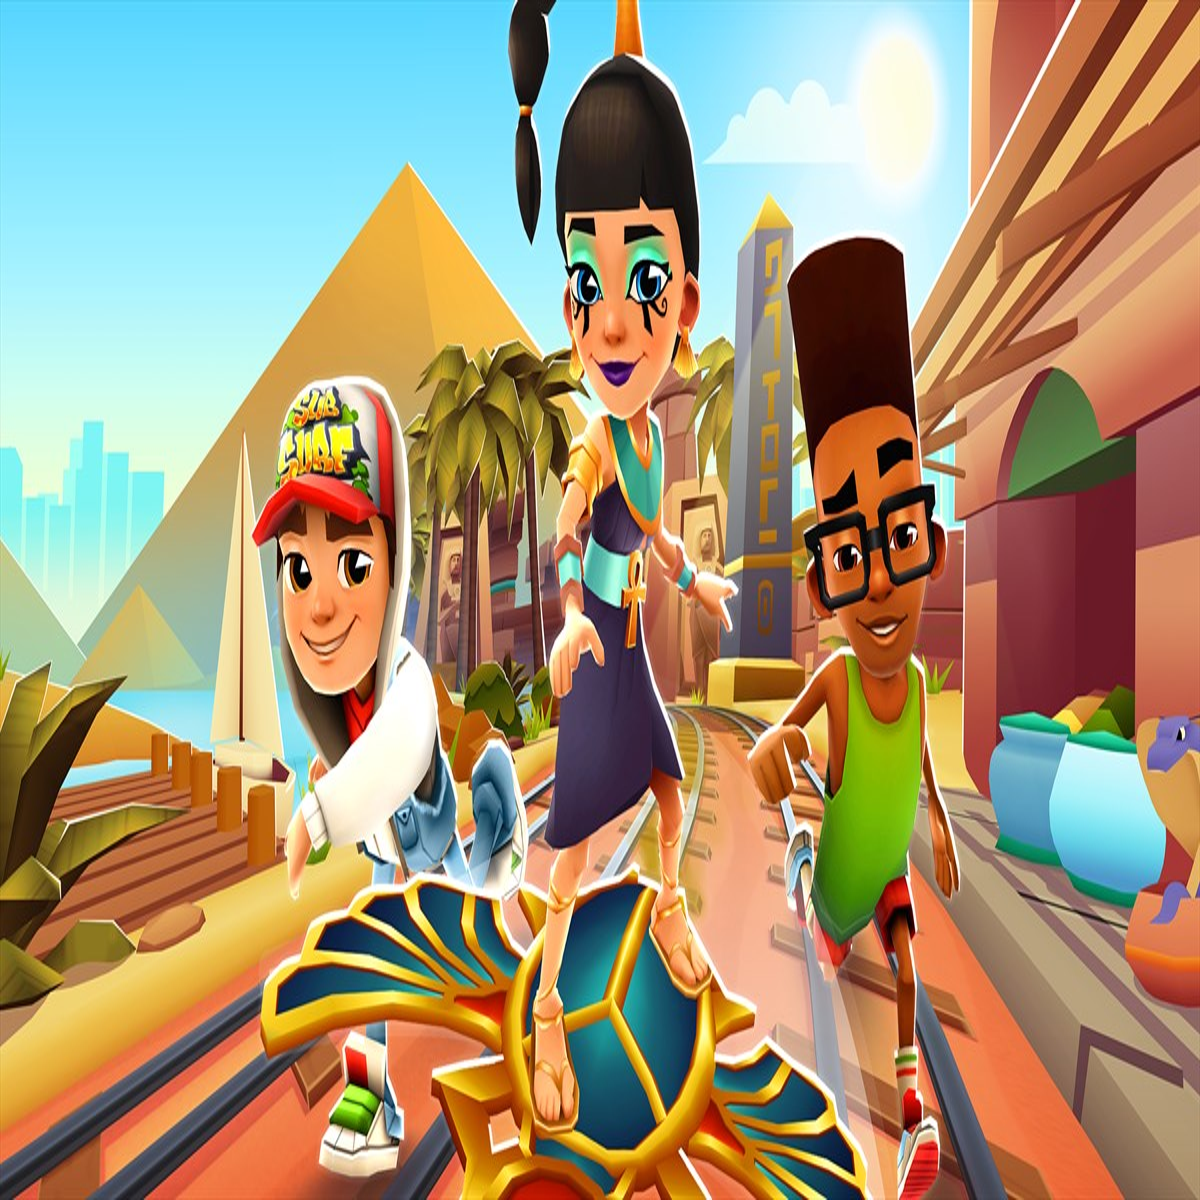 Subway Surfers - Subway Surfers updated their cover photo.